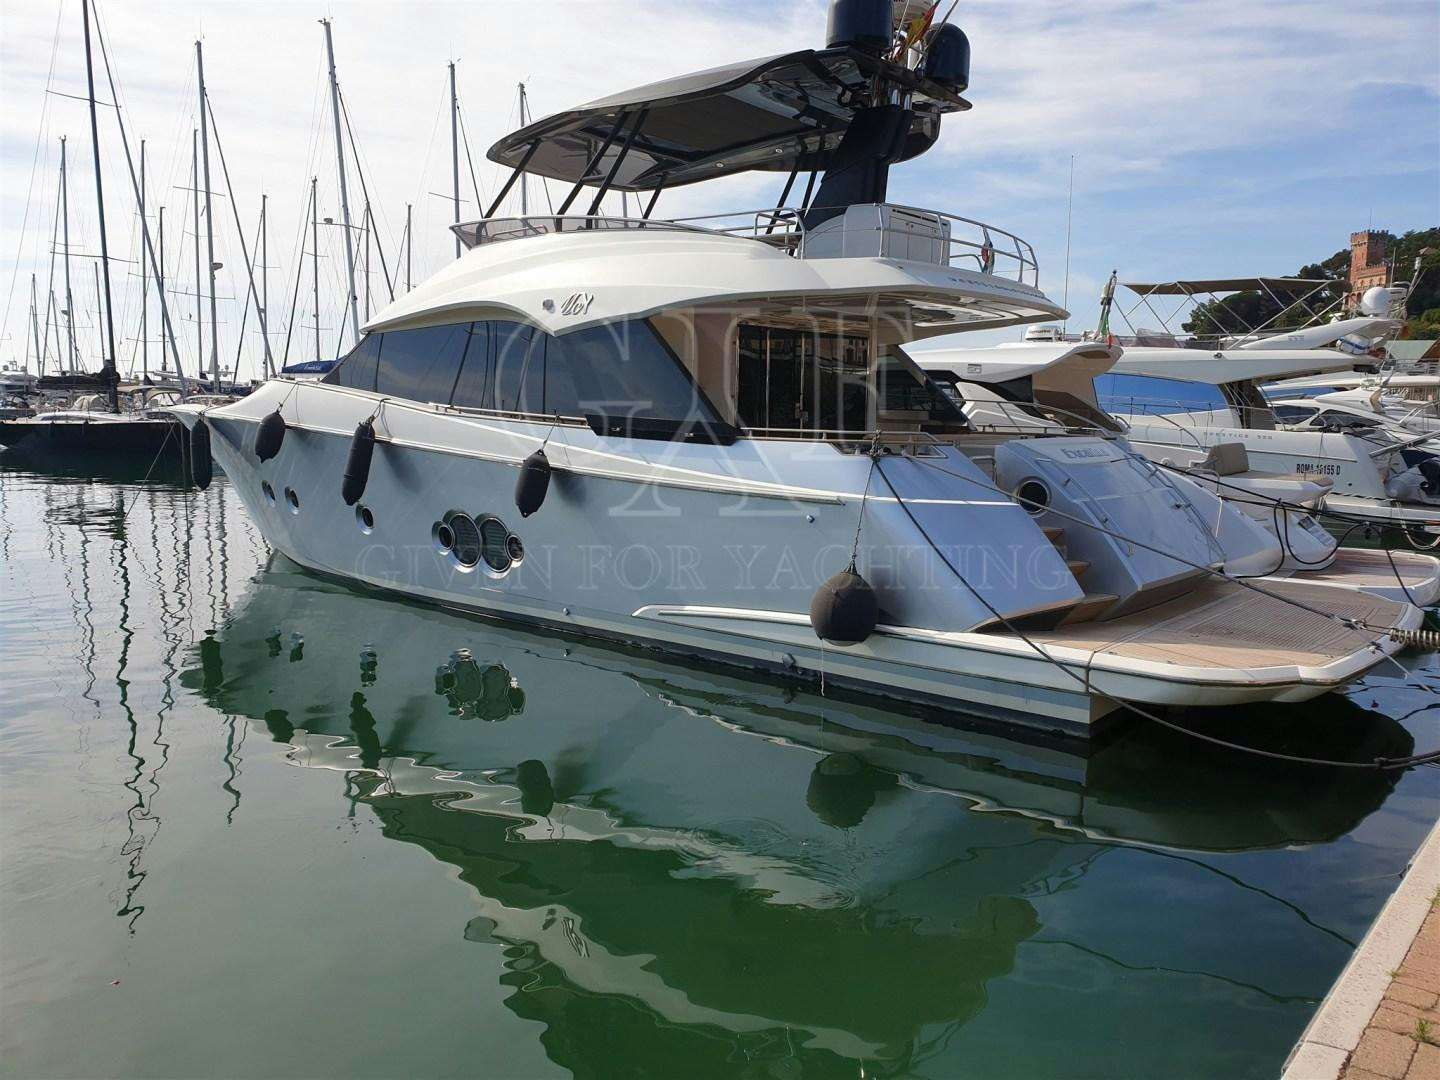 Excalibur
Yacht for Sale